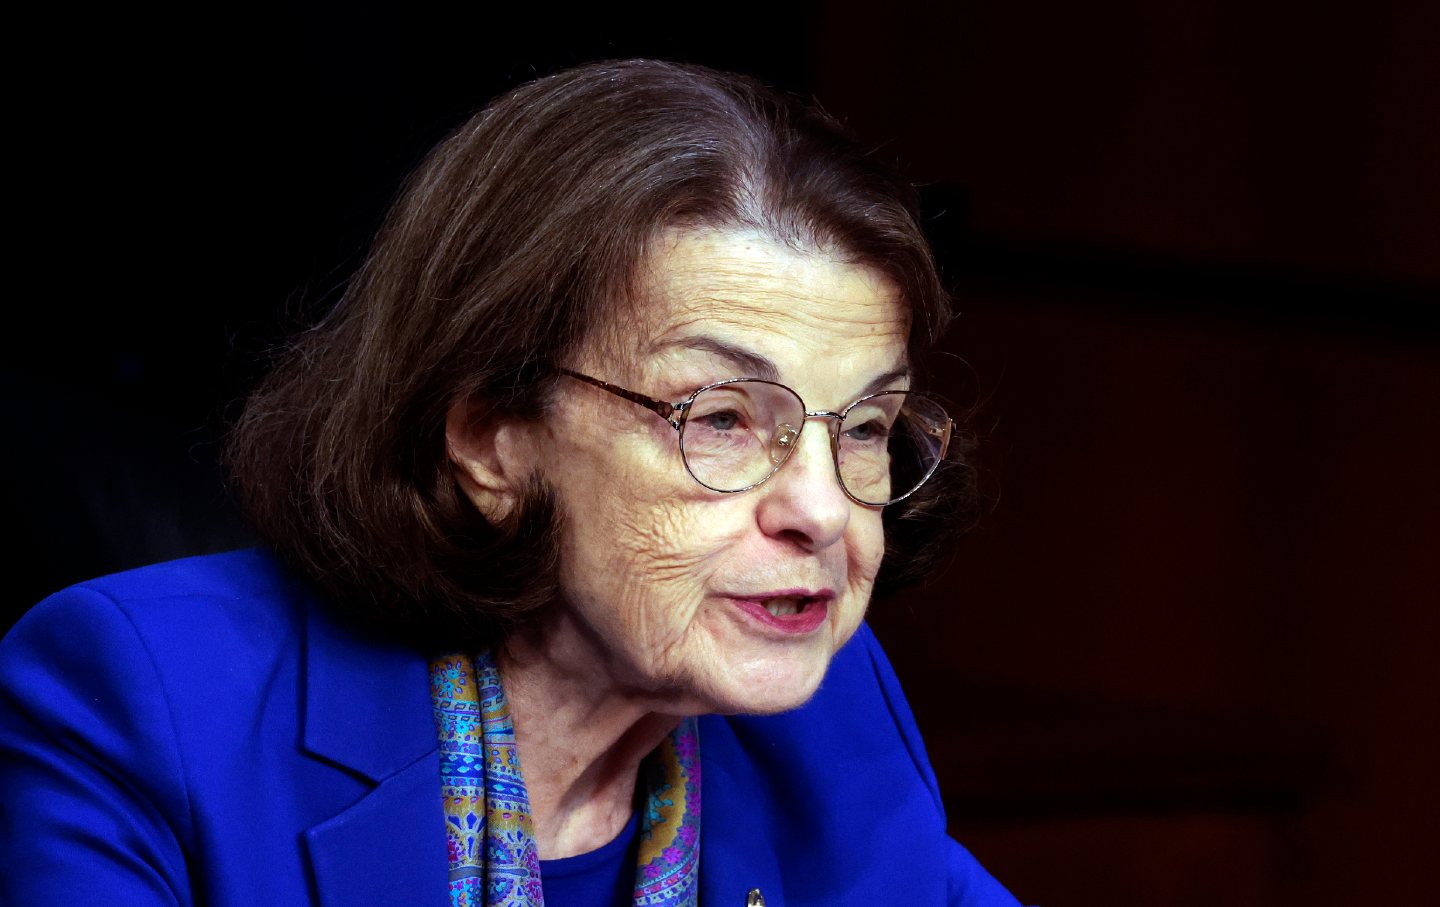 The Real Problem With Dianne Feinstein Isn’t Her Age